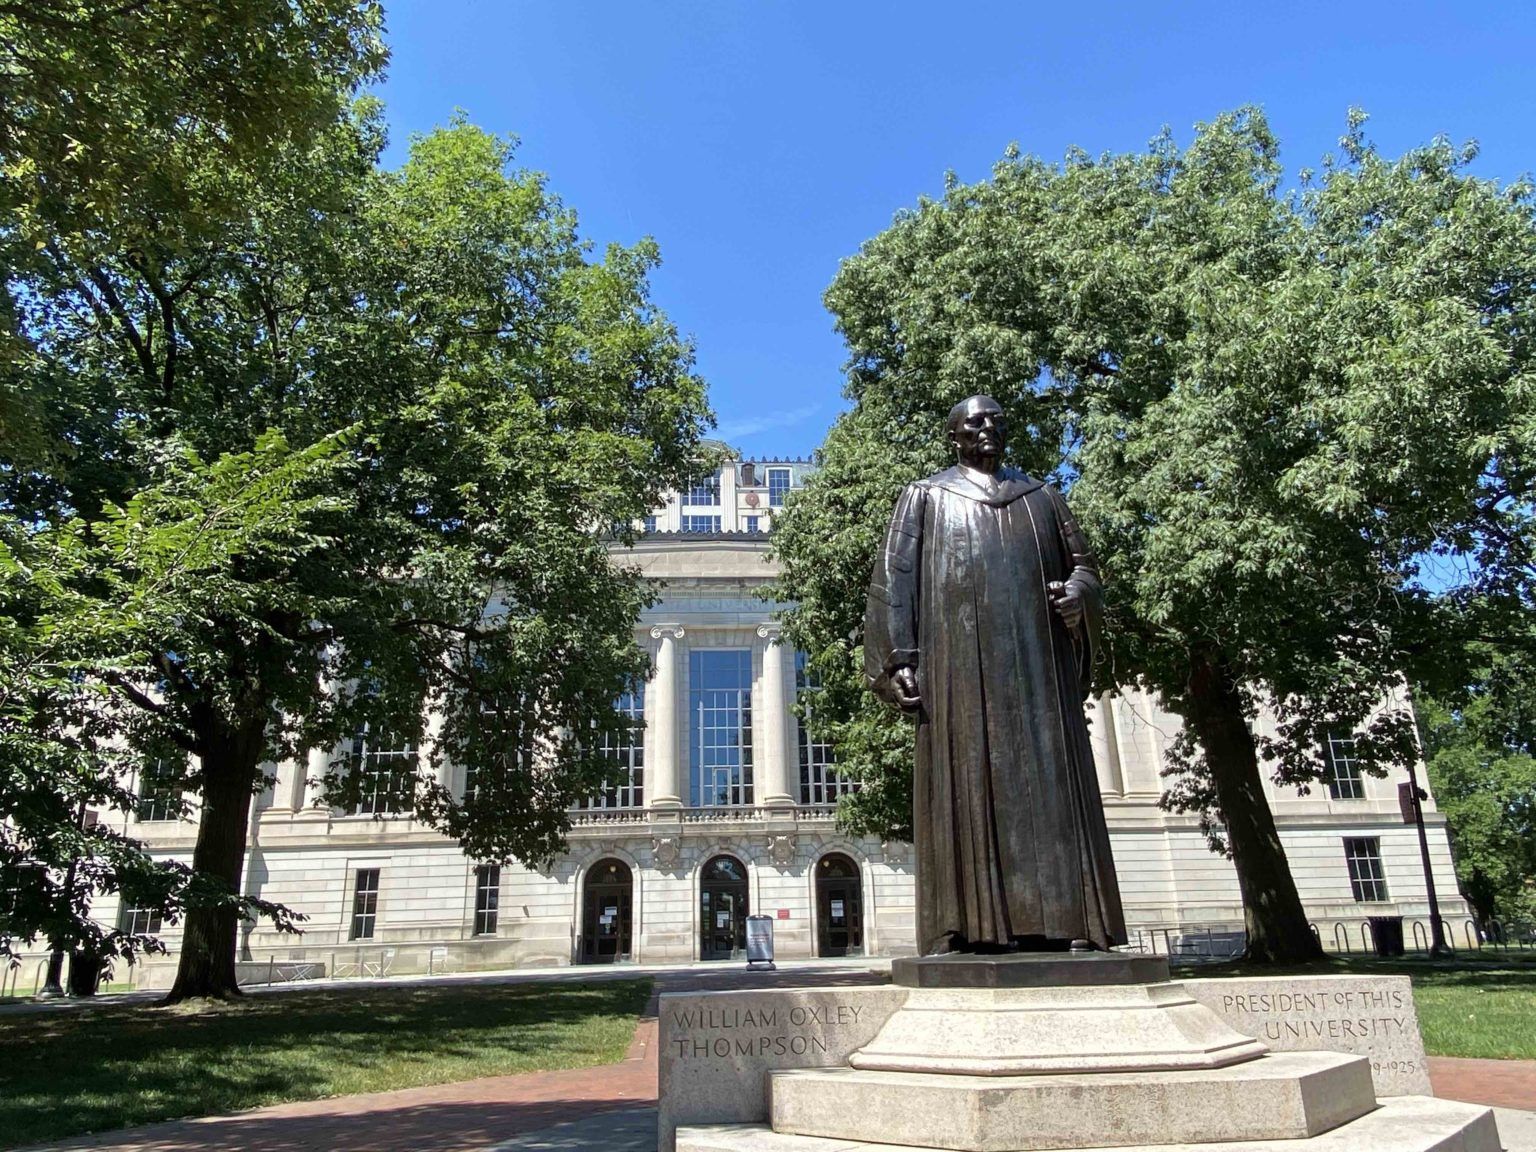 In front of The Ohio State library. Image courtesy of Eye On Ohio. United States, 2020.